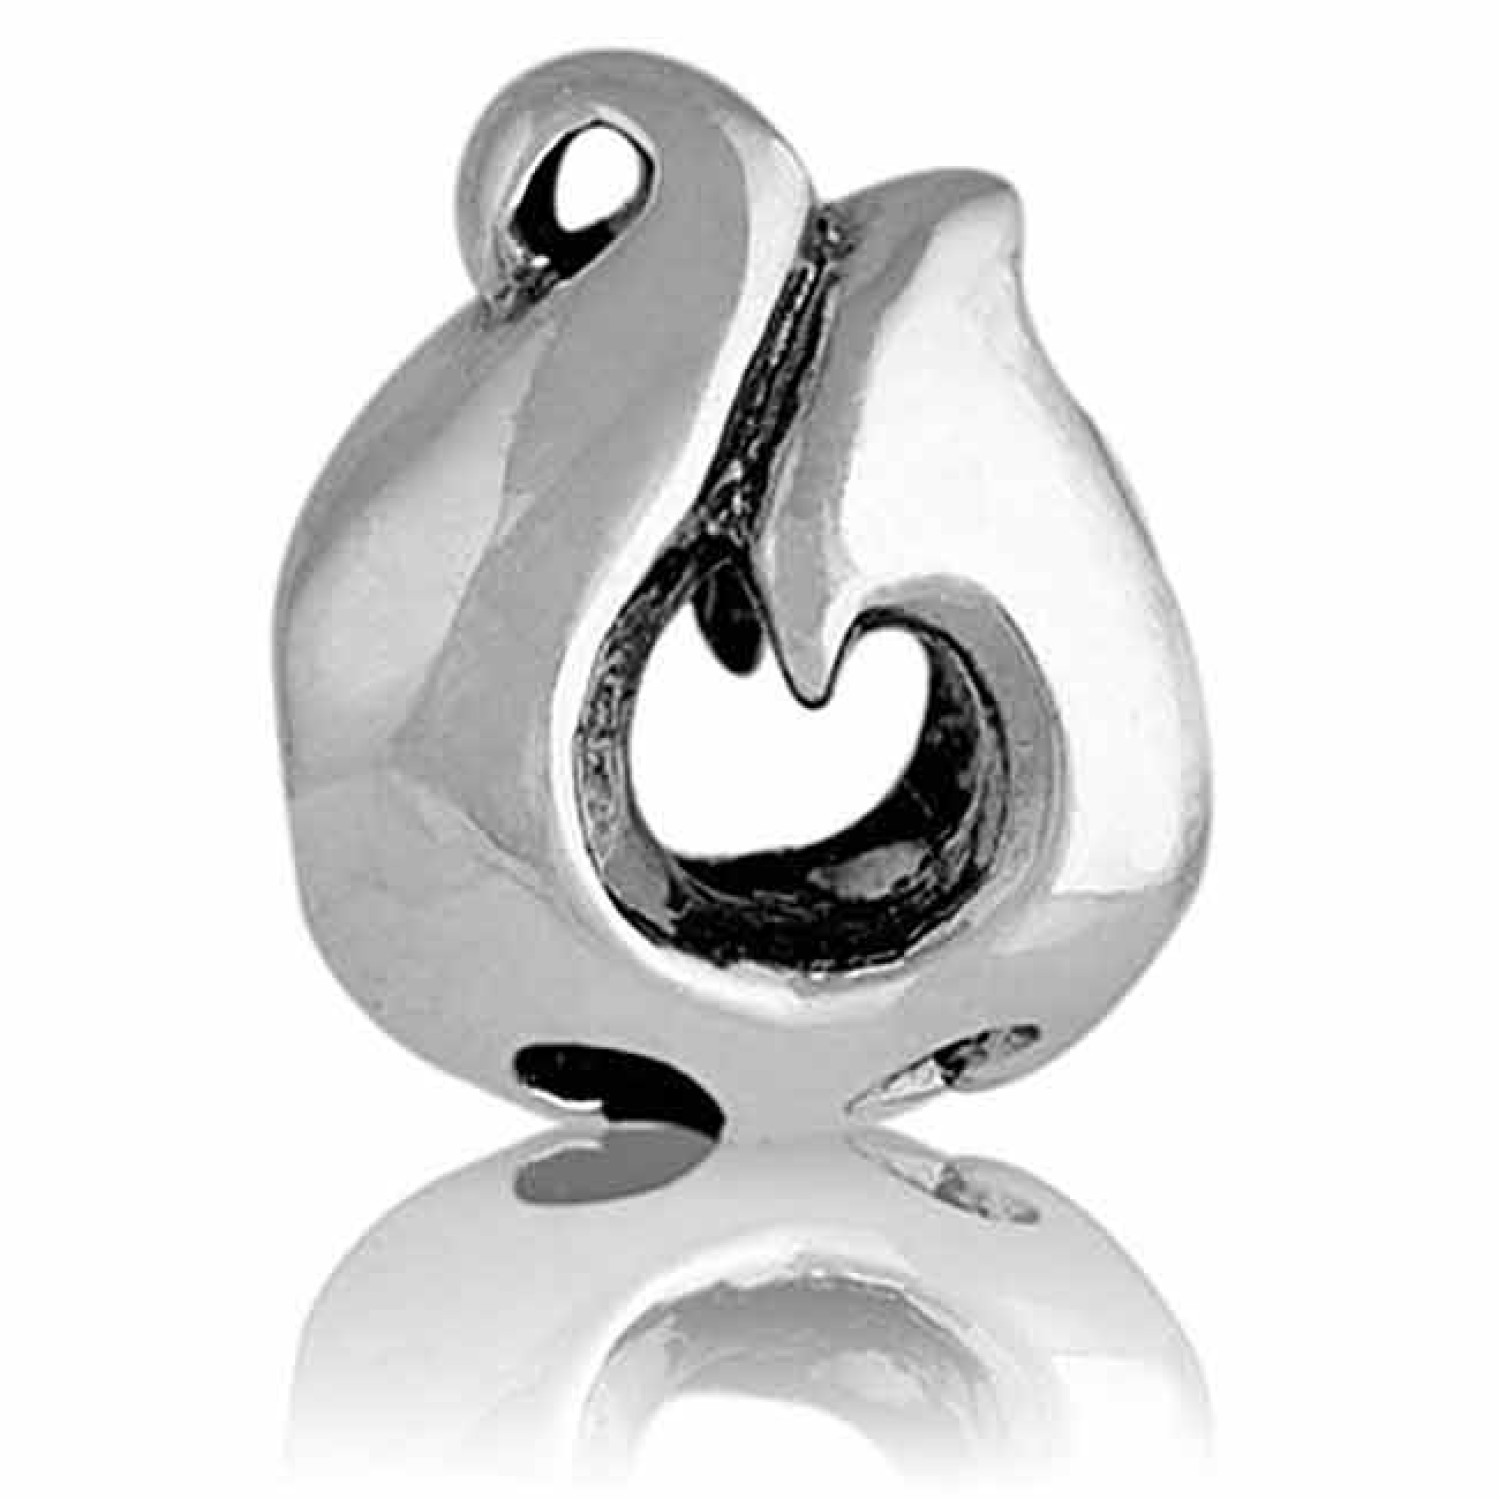 LK007 Evolve NZ Fish Hook  Protection and Safety. LK007 Evolve NZ Fish Hook Protection and Safety Silver Charm This Evolve fish hook charm offers a guiding light of protection for those who we wish to see kept safe. Often worn by travellers, or those emba